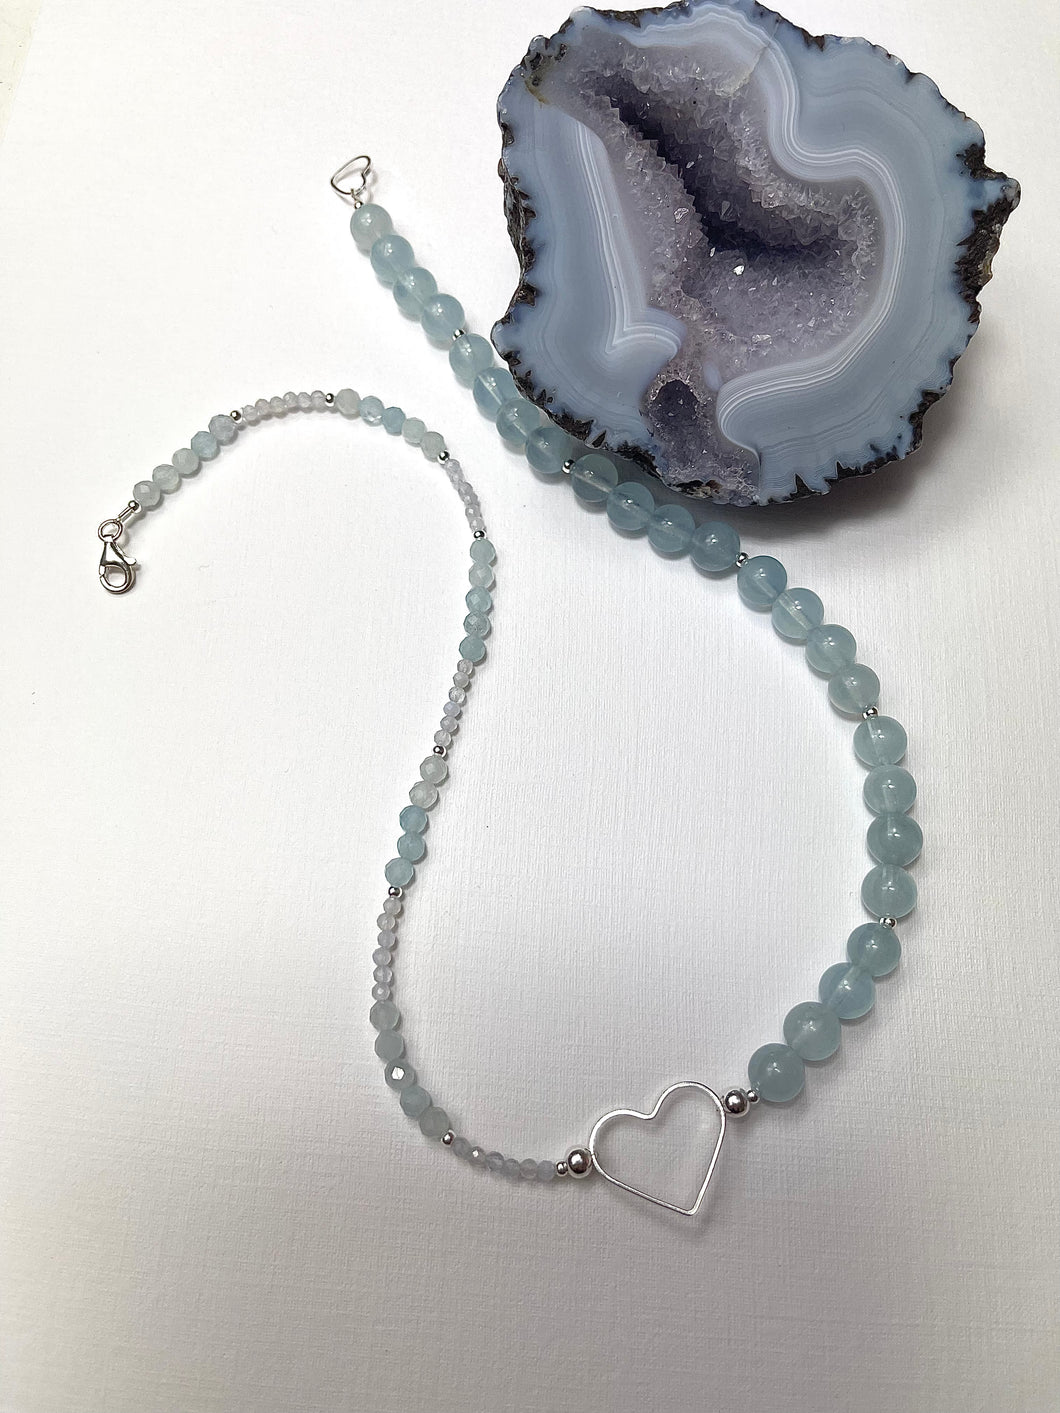 Aquamarine & Blue Lace Agate Sterling Silver Necklace